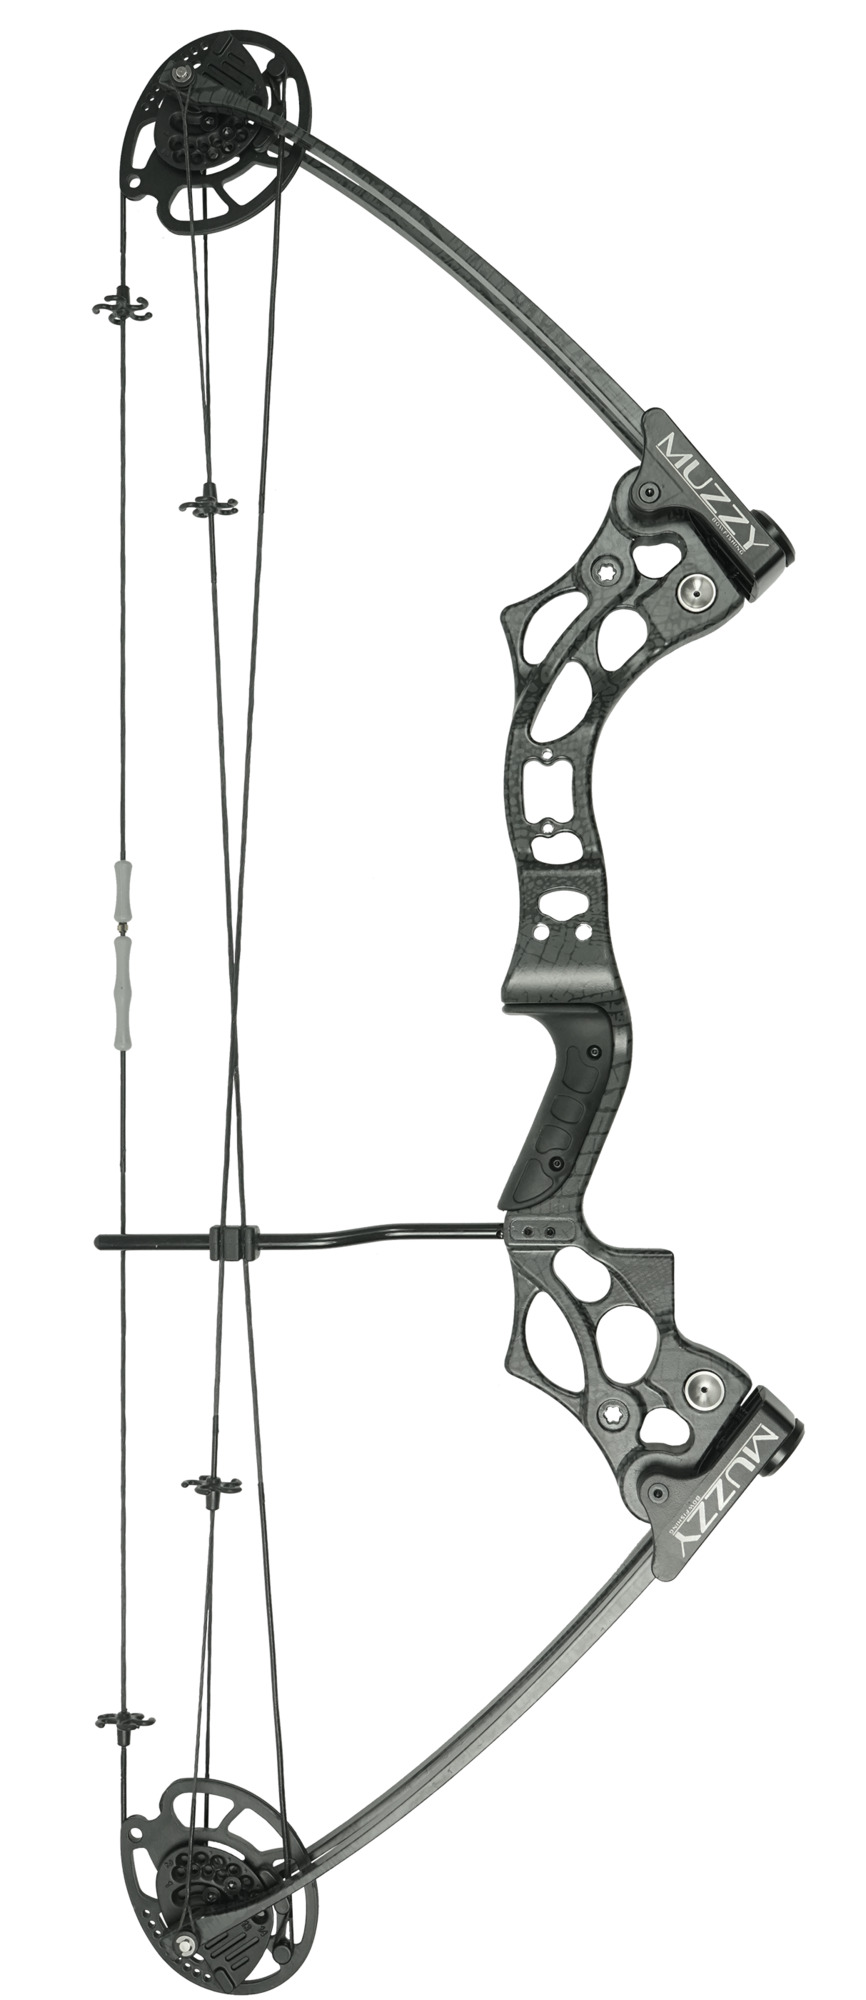 Muzzy V2 Bowfishing Bow  Up to 10% Off w/ Free Shipping and Handling